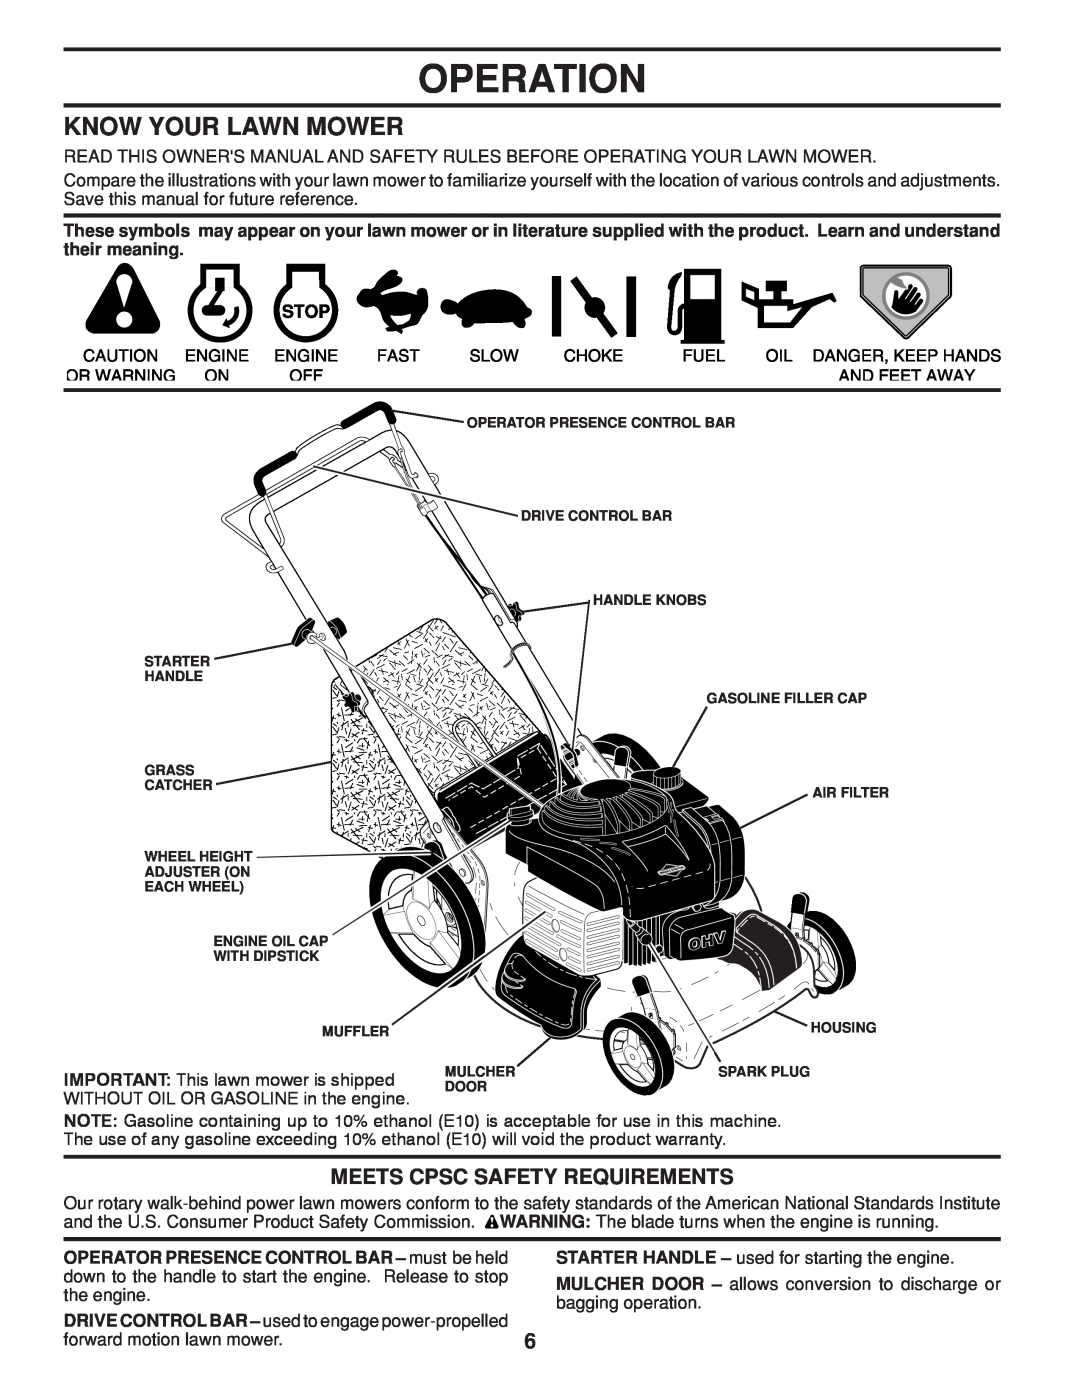 Husqvarna 961430096 Operation, Know Your Lawn Mower, Meets Cpsc Safety Requirements, IMPORTANT This lawn mower is shipped 